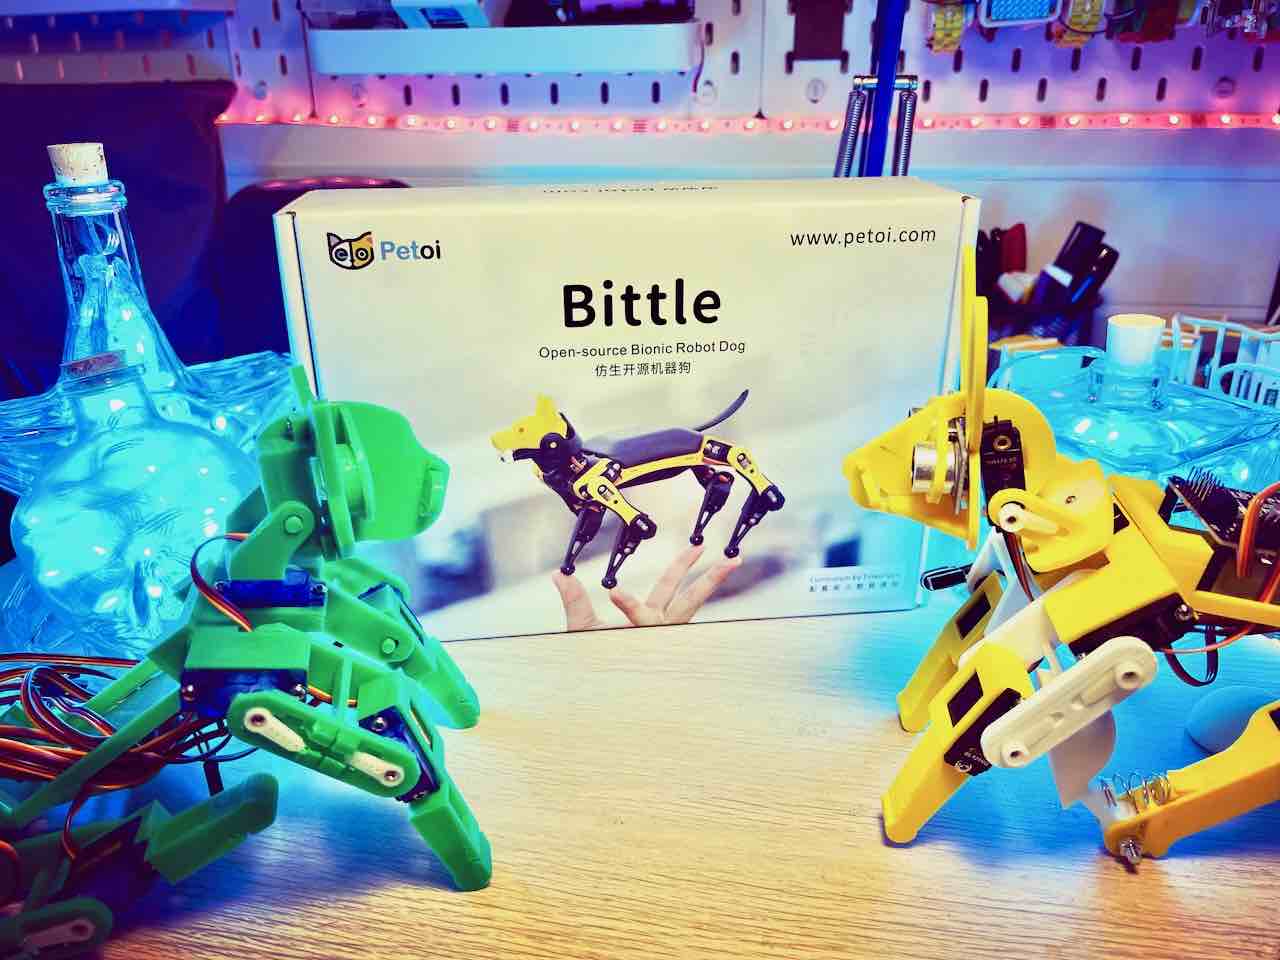 Page cover image for Petoi Robot Dog Bittle